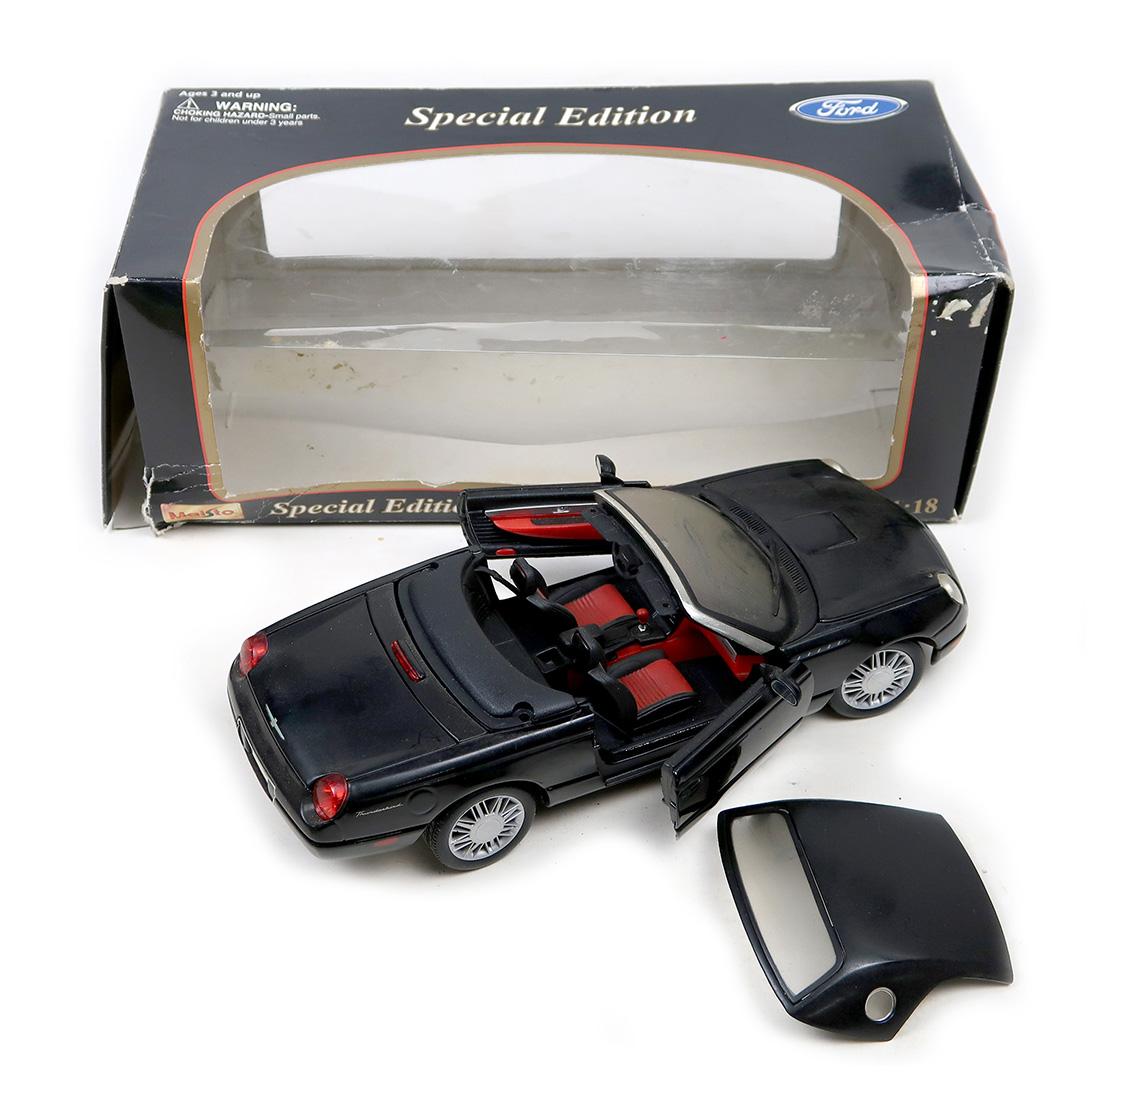 Toy Scale Models (3), Jada Toys 1967 Shelby GT-5000KR, Maisto 2002 Ford Thu